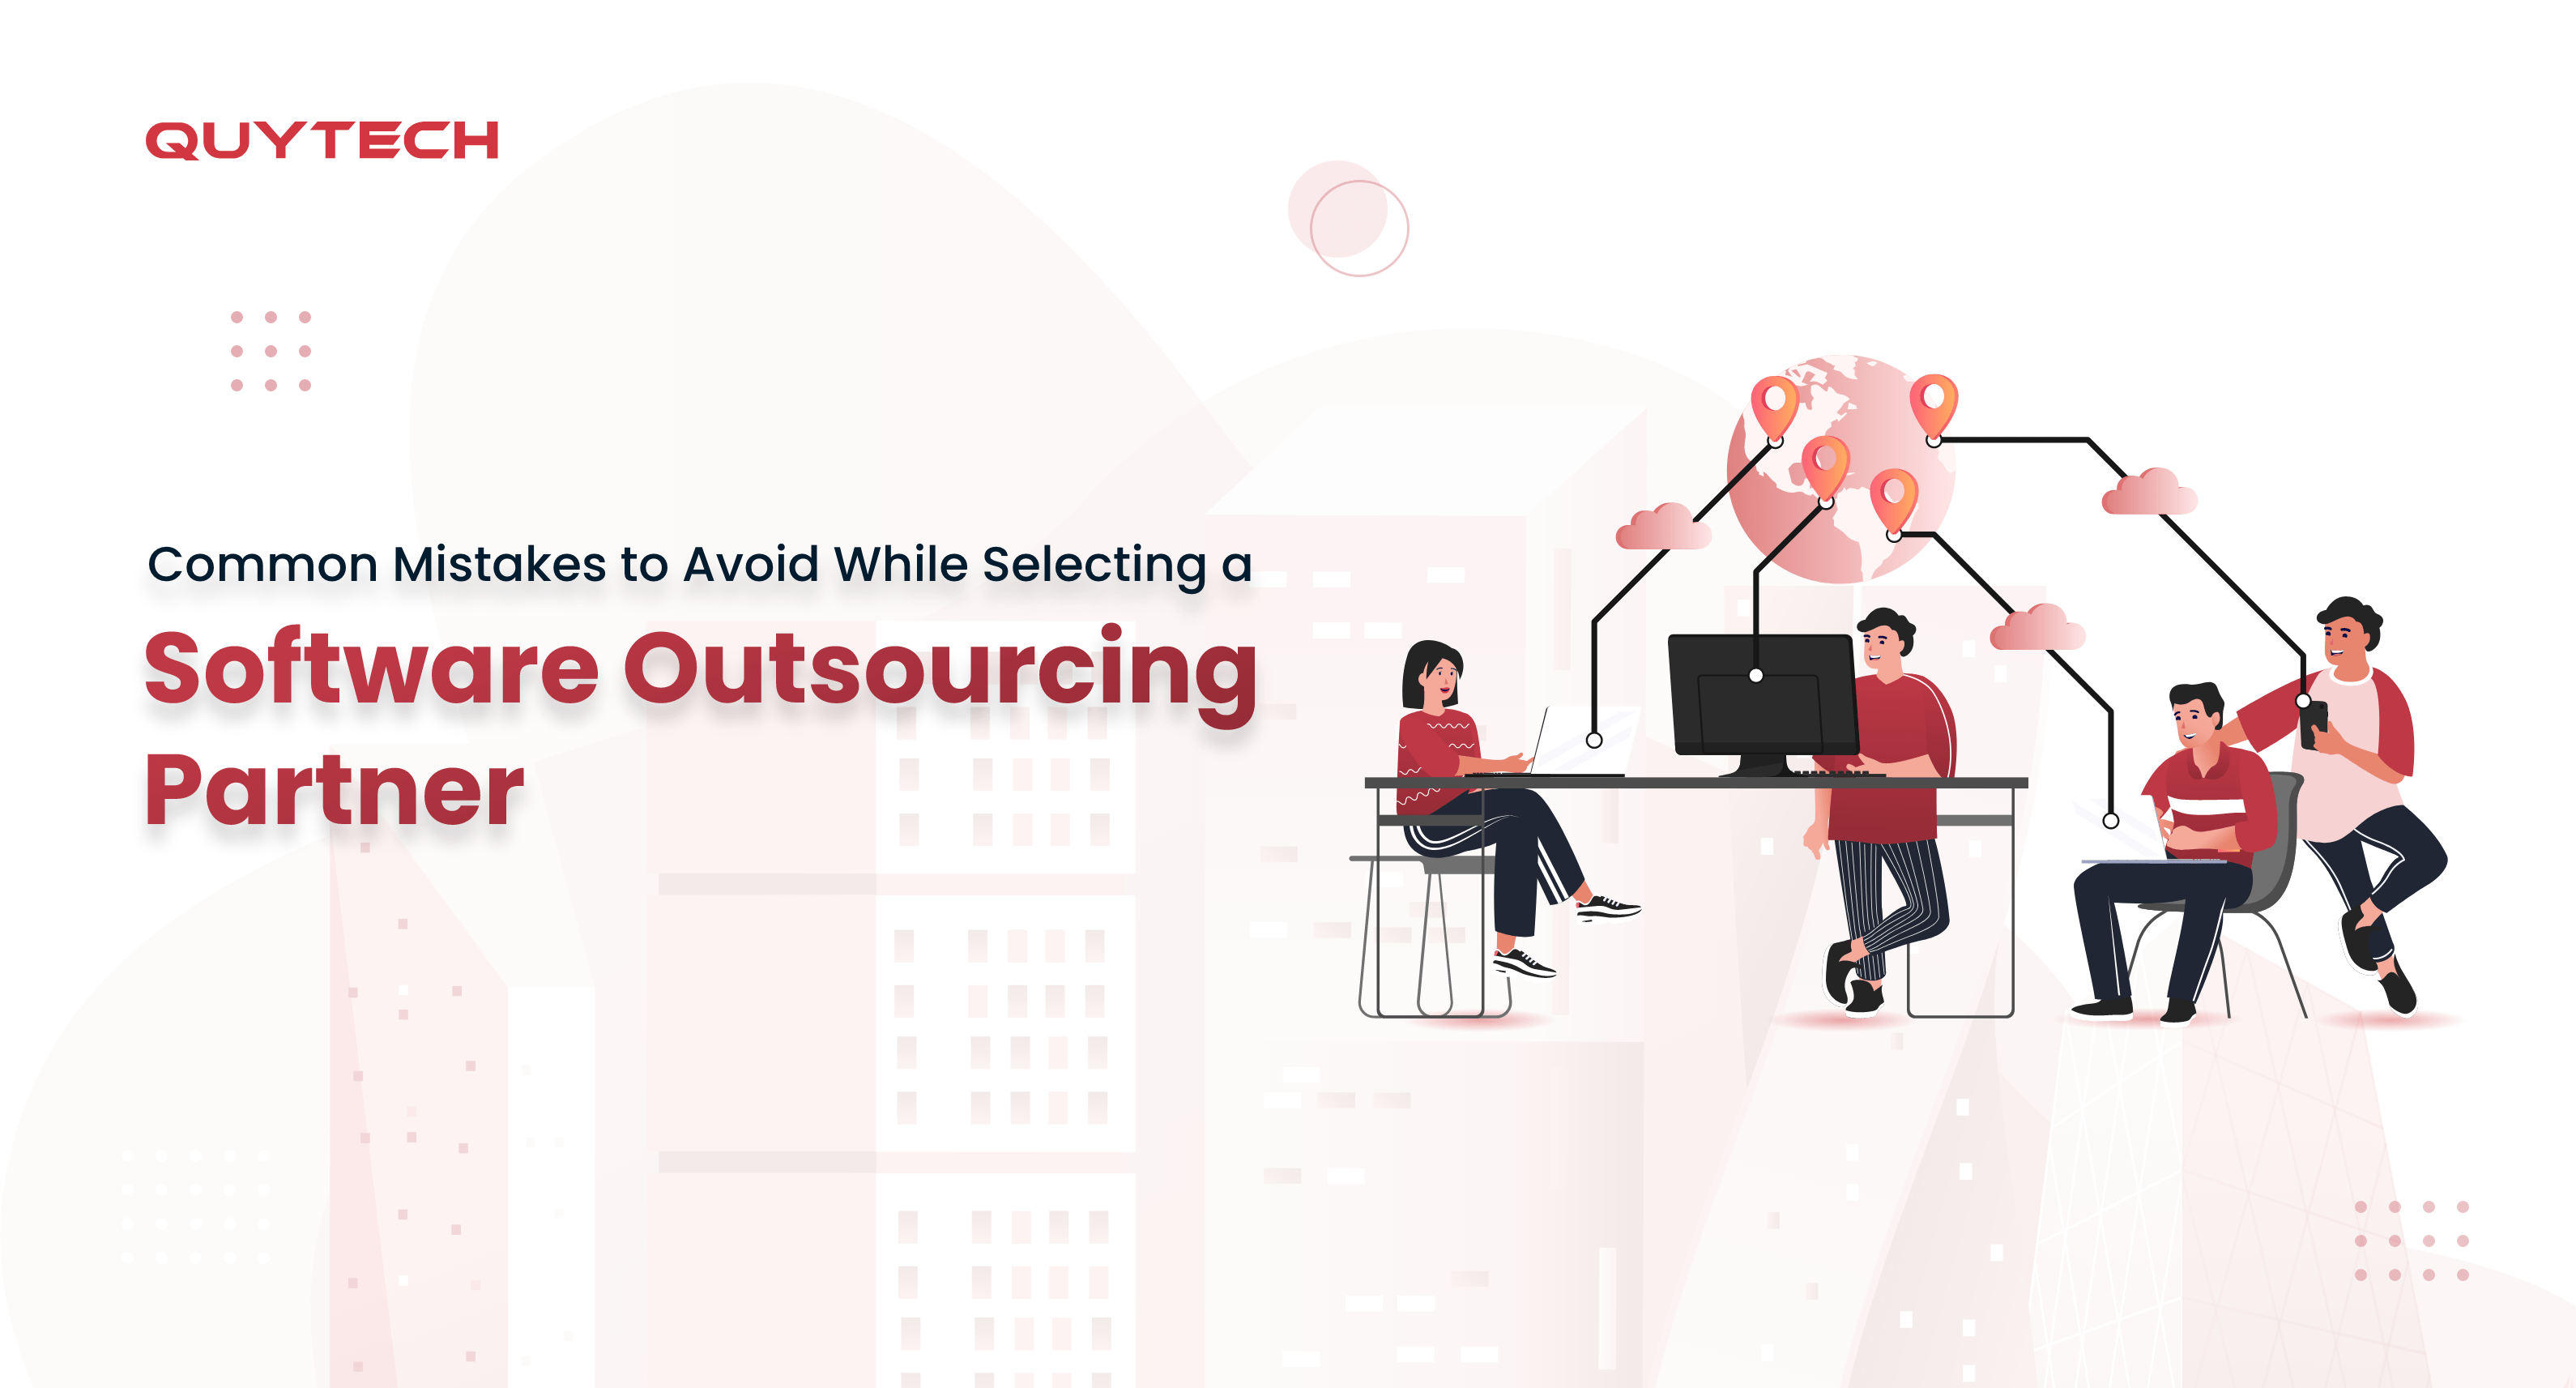 Common Mistakes to Avoid While Selecting a Software Outsourcing Partner